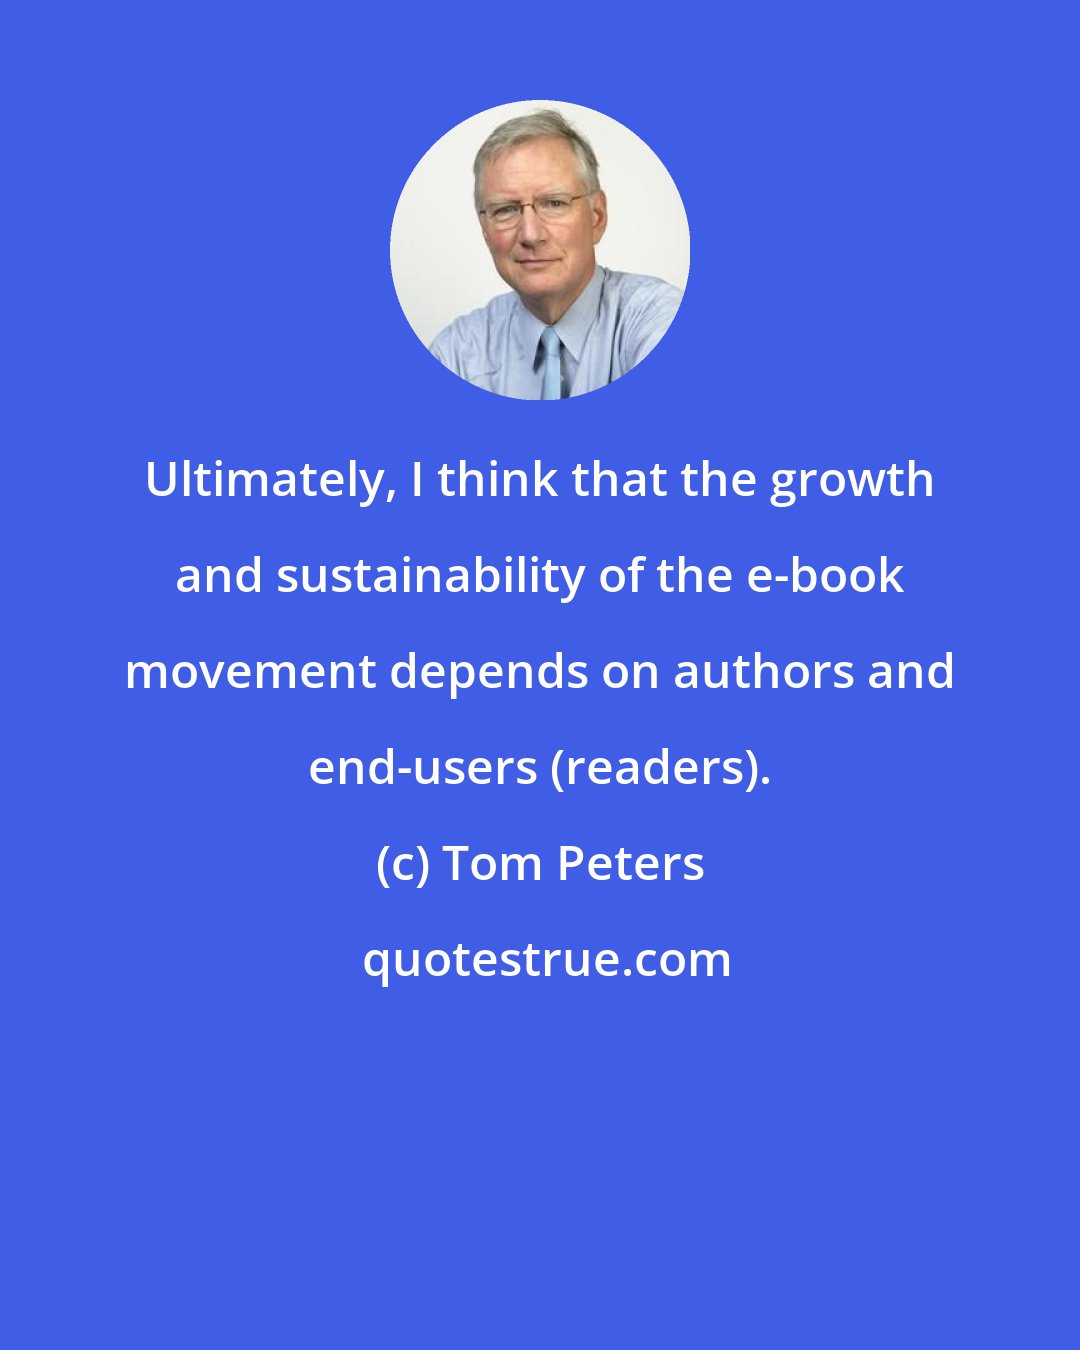 Tom Peters: Ultimately, I think that the growth and sustainability of the e-book movement depends on authors and end-users (readers).